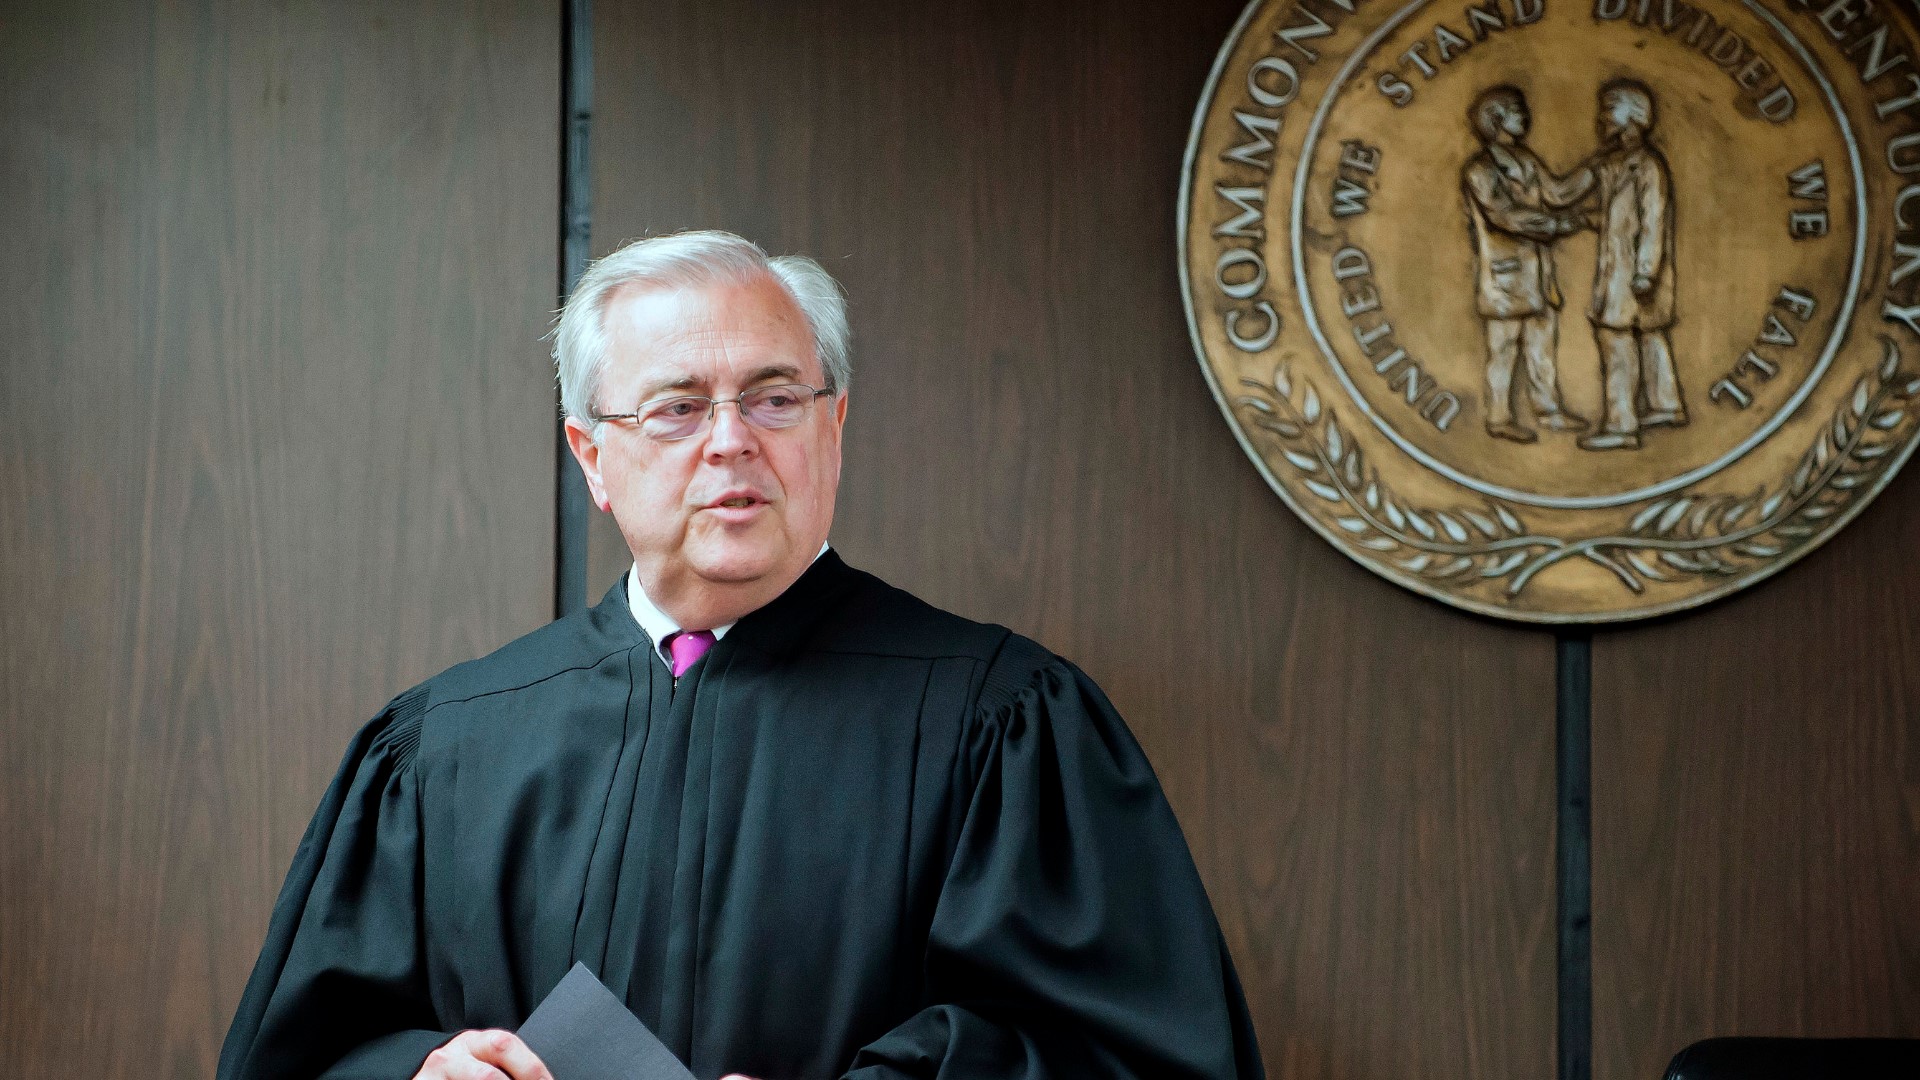 Chief Justice John D. Minton joined the Supreme Court in 2006.